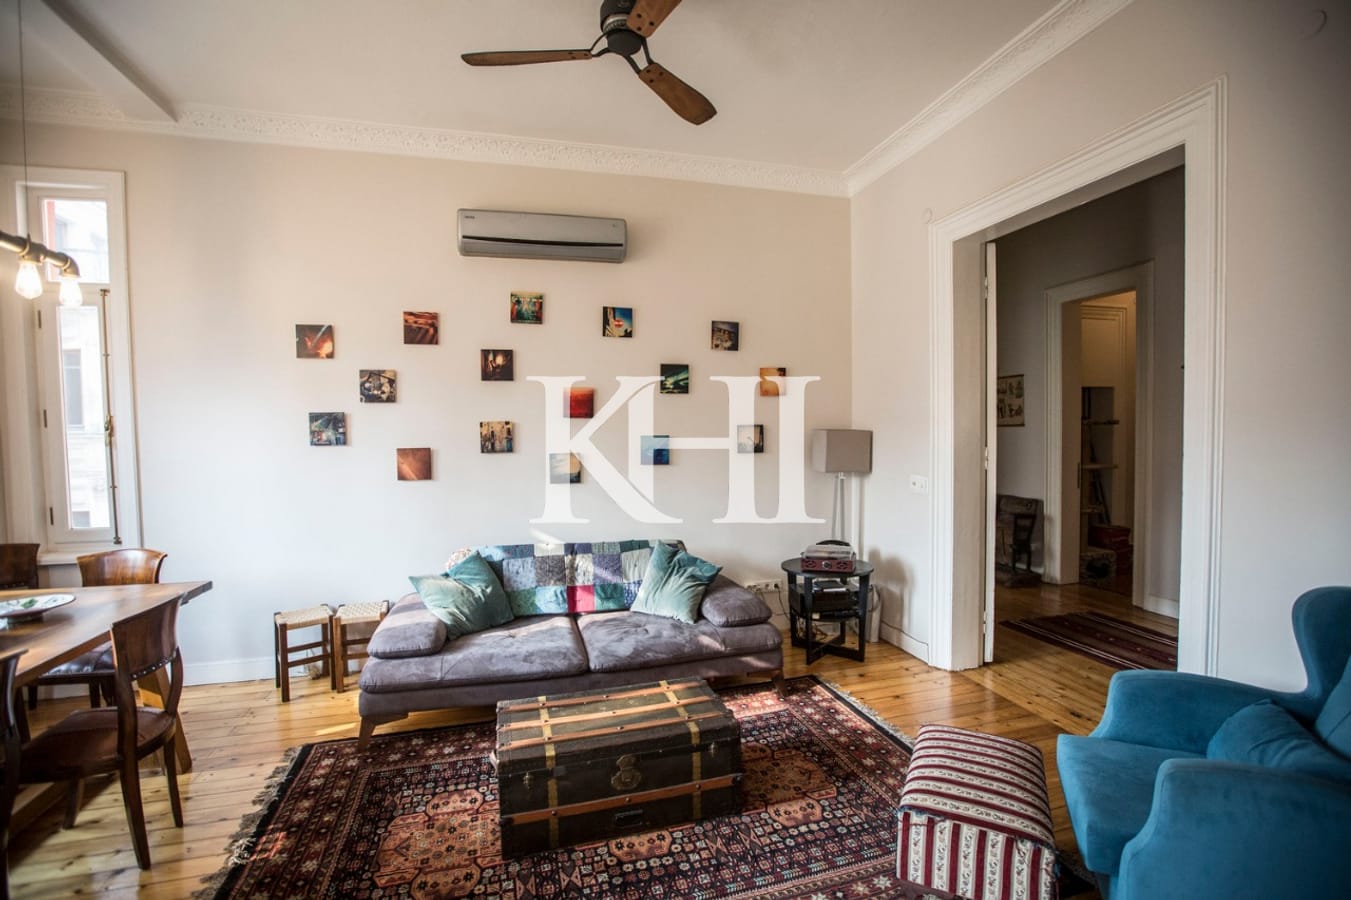 Traditional City Centre Apartment For Sale In Istanbul Slide Image 9